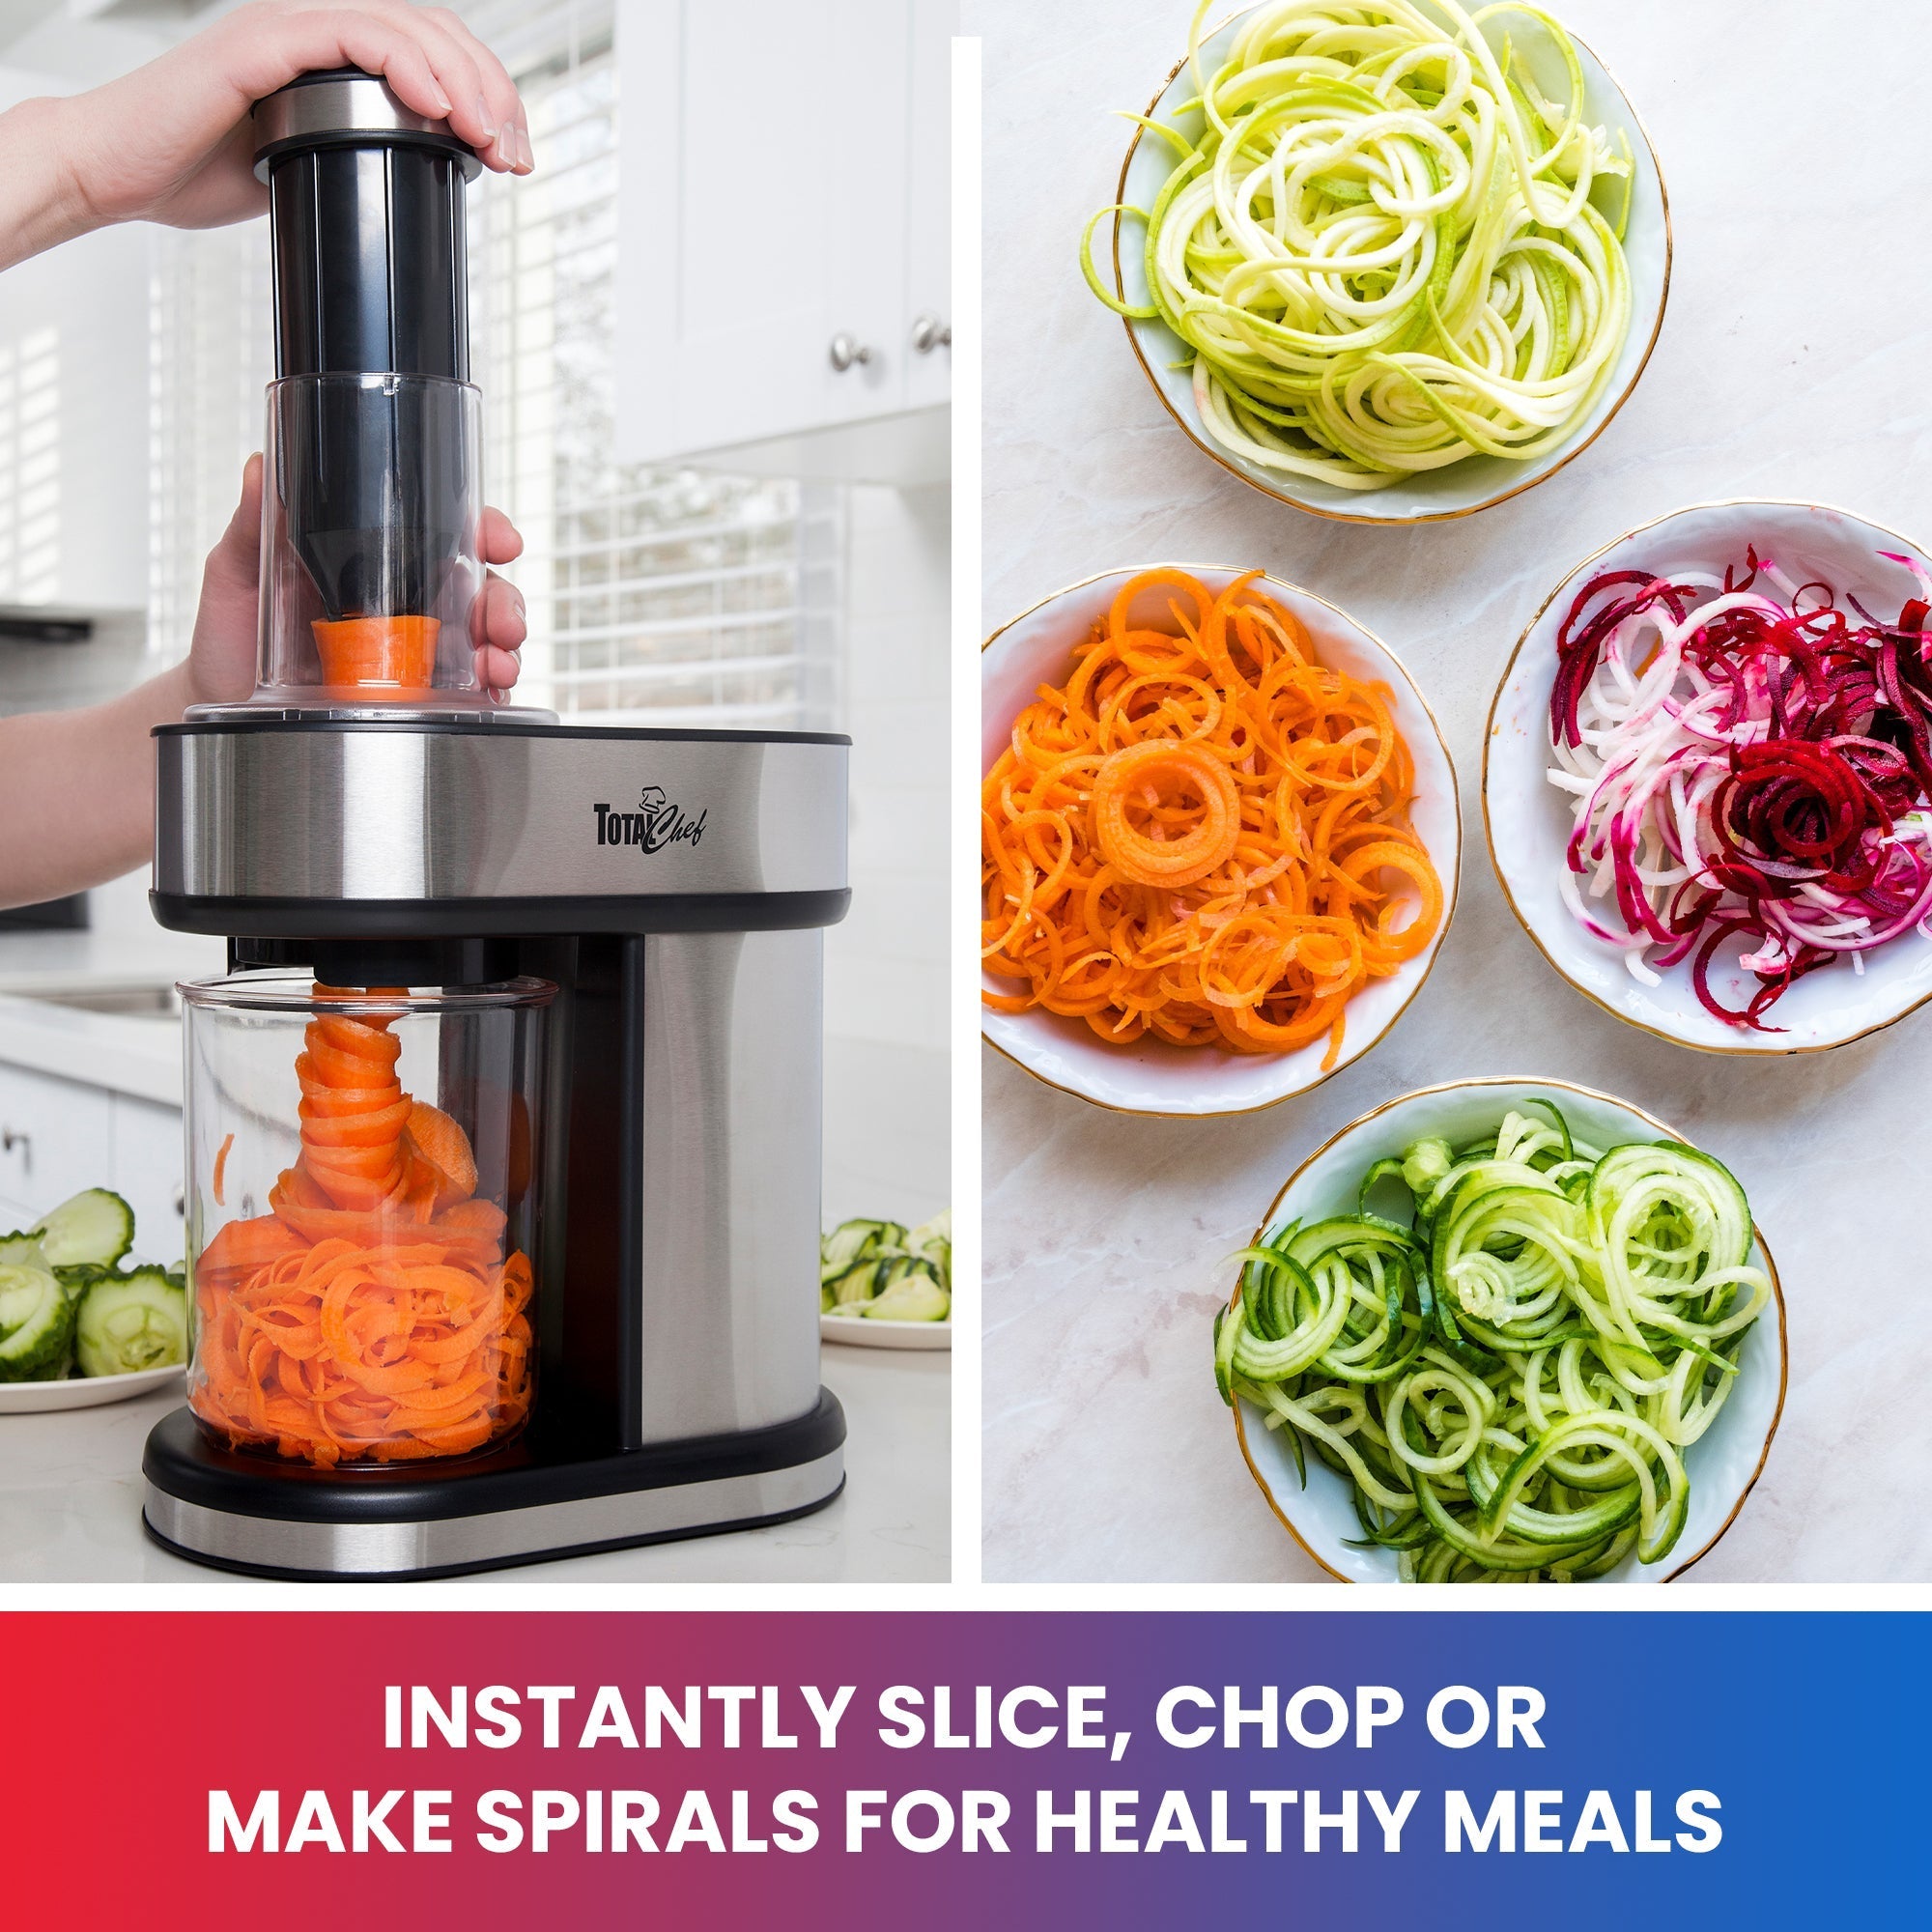 Lifestyle image of person using spiralizer to cut carrots on left and bowls of veggie noodles on right. Text below reads "Instantly slice, chop, or make spirals for healthy meals"